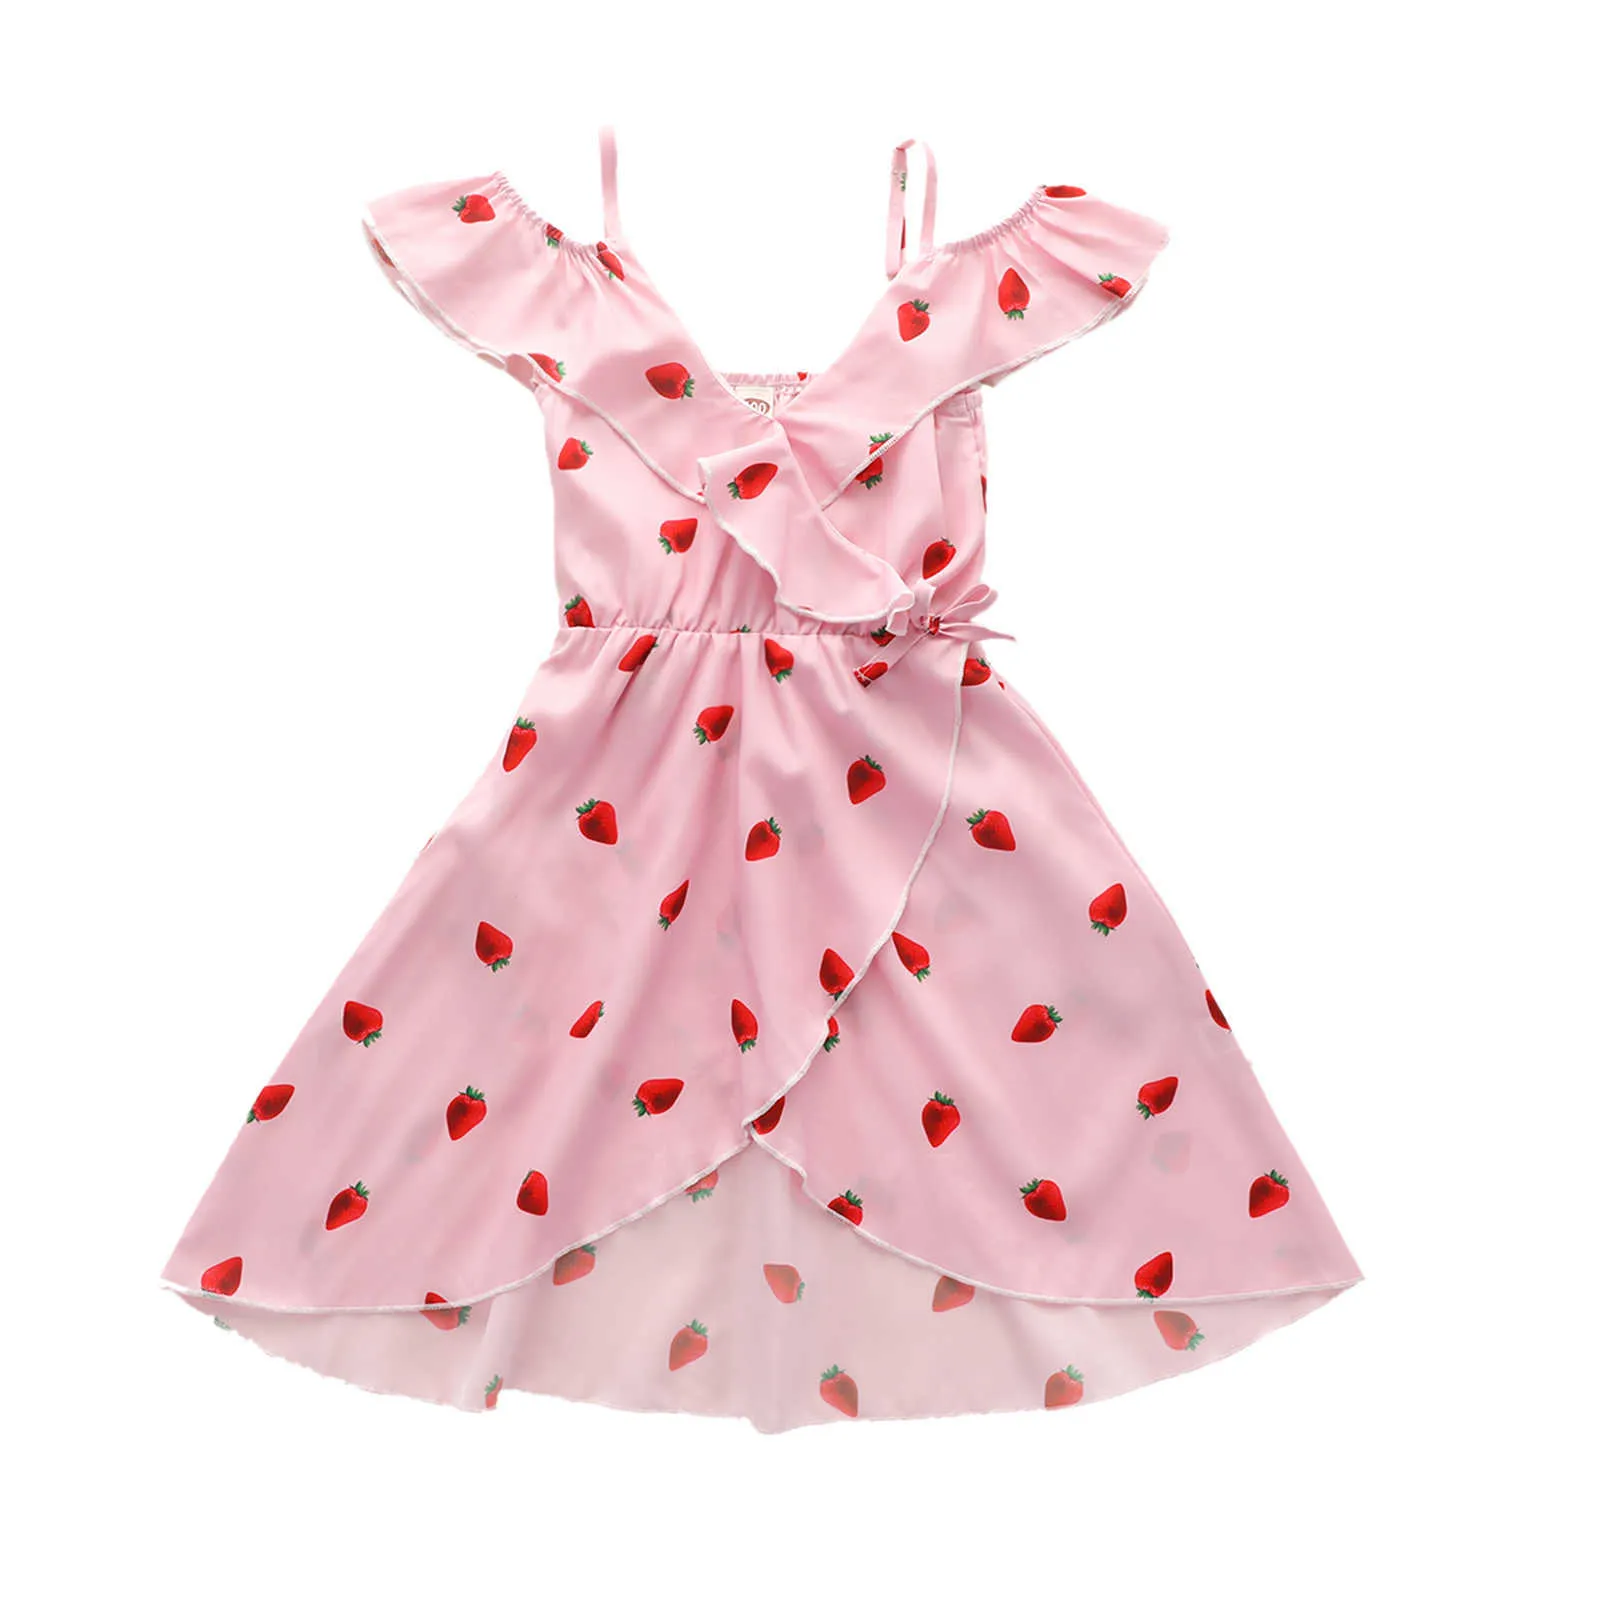 Toddler Baby Girl's Dress, Strawberry Printing Sleeveless Outfits, Casual V-neck High Waist One-piece Clothing 2-7T Q0716